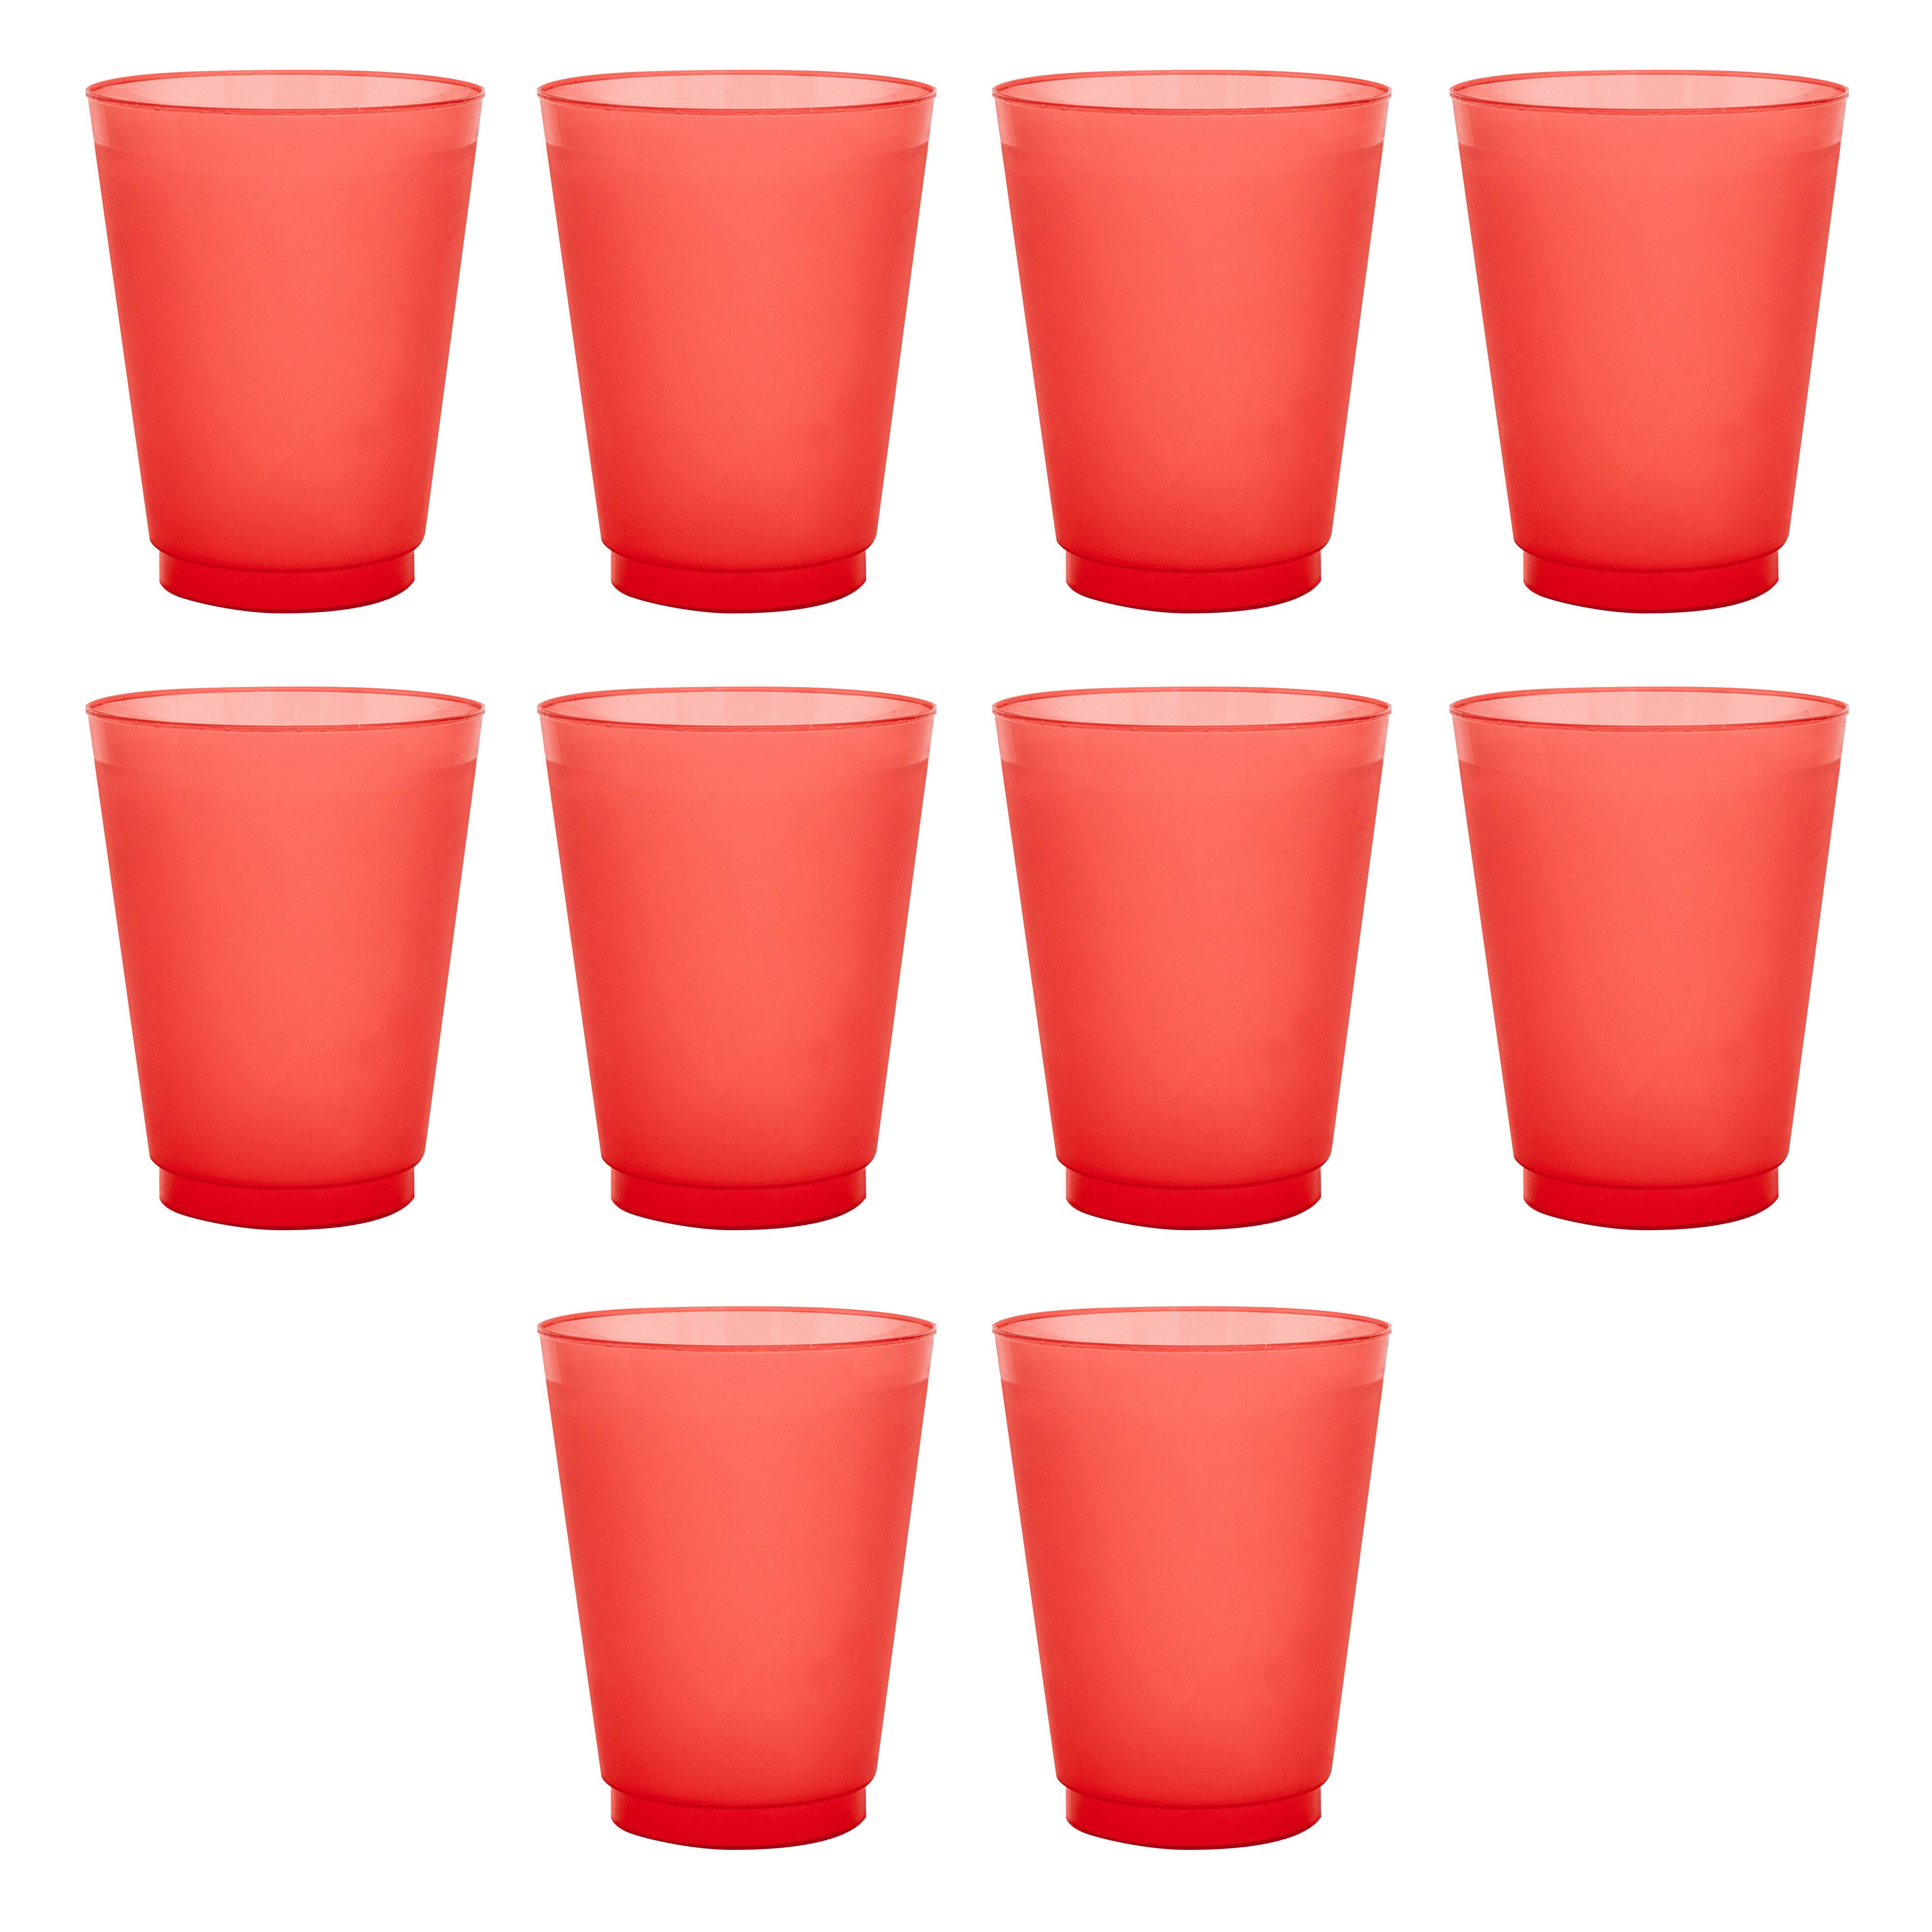 Frosted Plastic Stadium Cup 16 oz. Set of 10, Bulk Pack - Shatterproof,  Flexible, Reusable Party Cups - Red